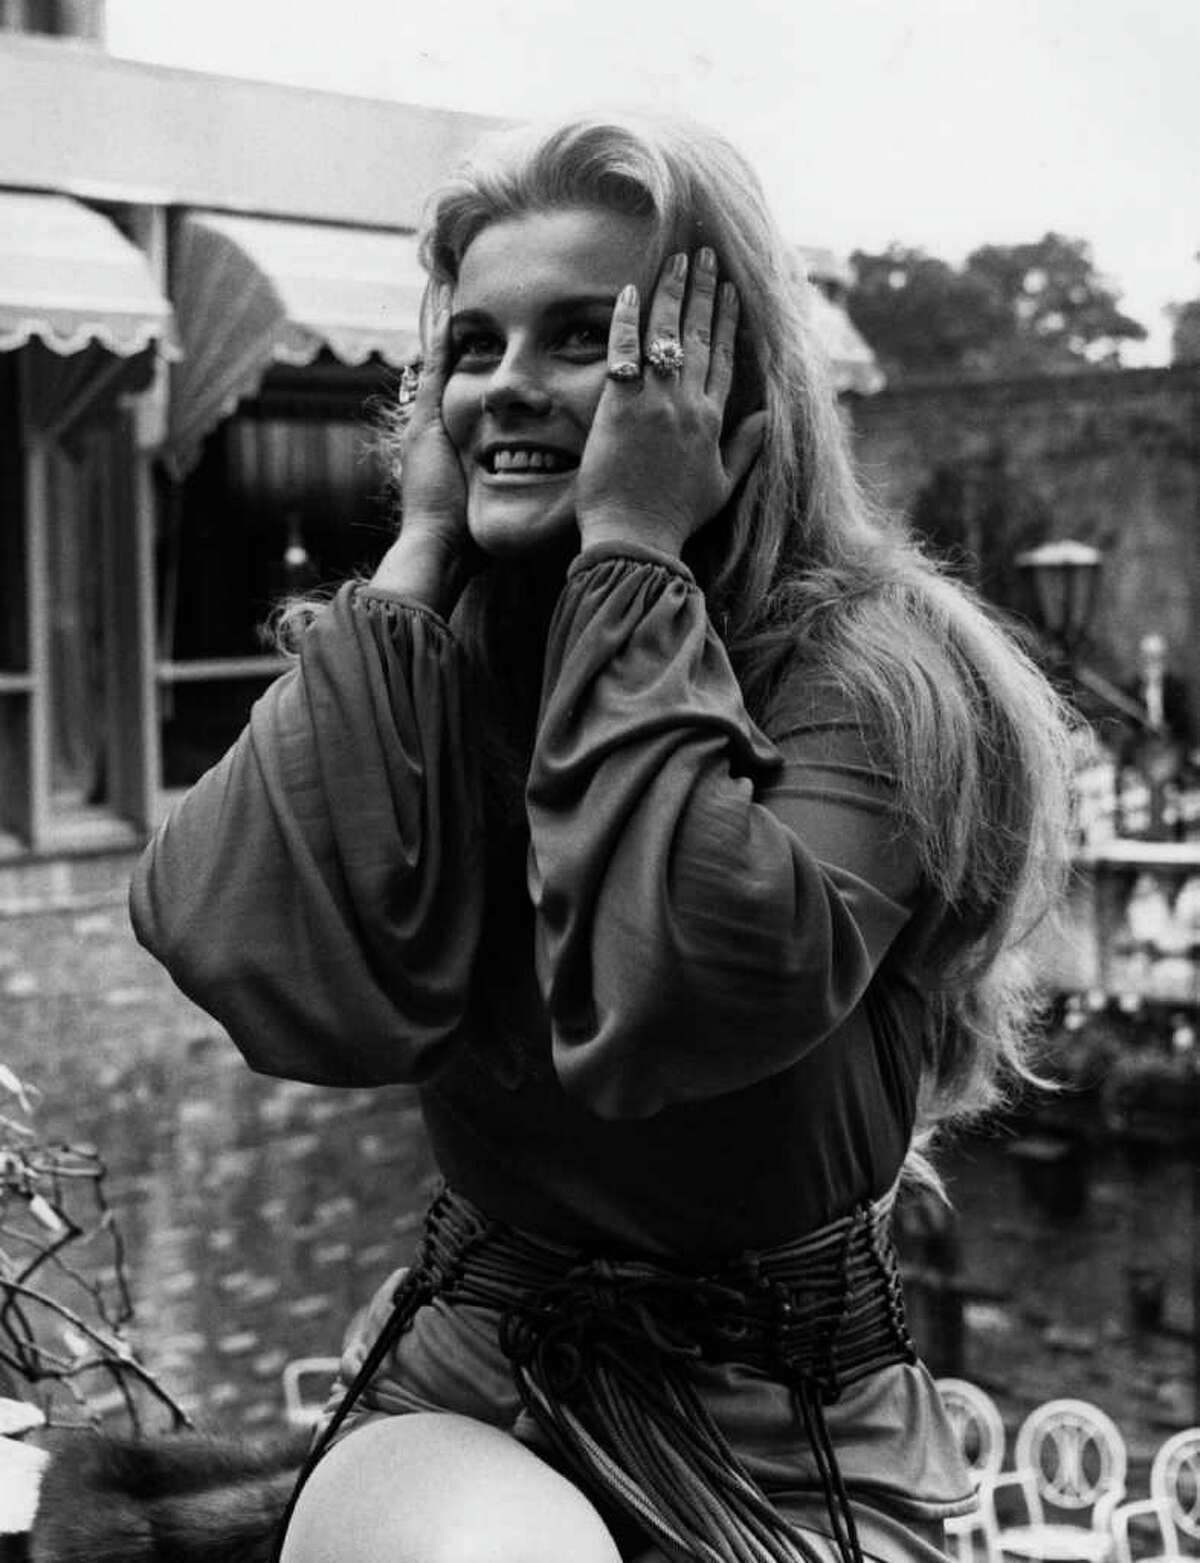 Swedish-born American actress Ann-Margret in London prior to the opening of the film 'Carnal Knowledge', directed by Mike Nichols. Original Publication: People Disc - HJ0409